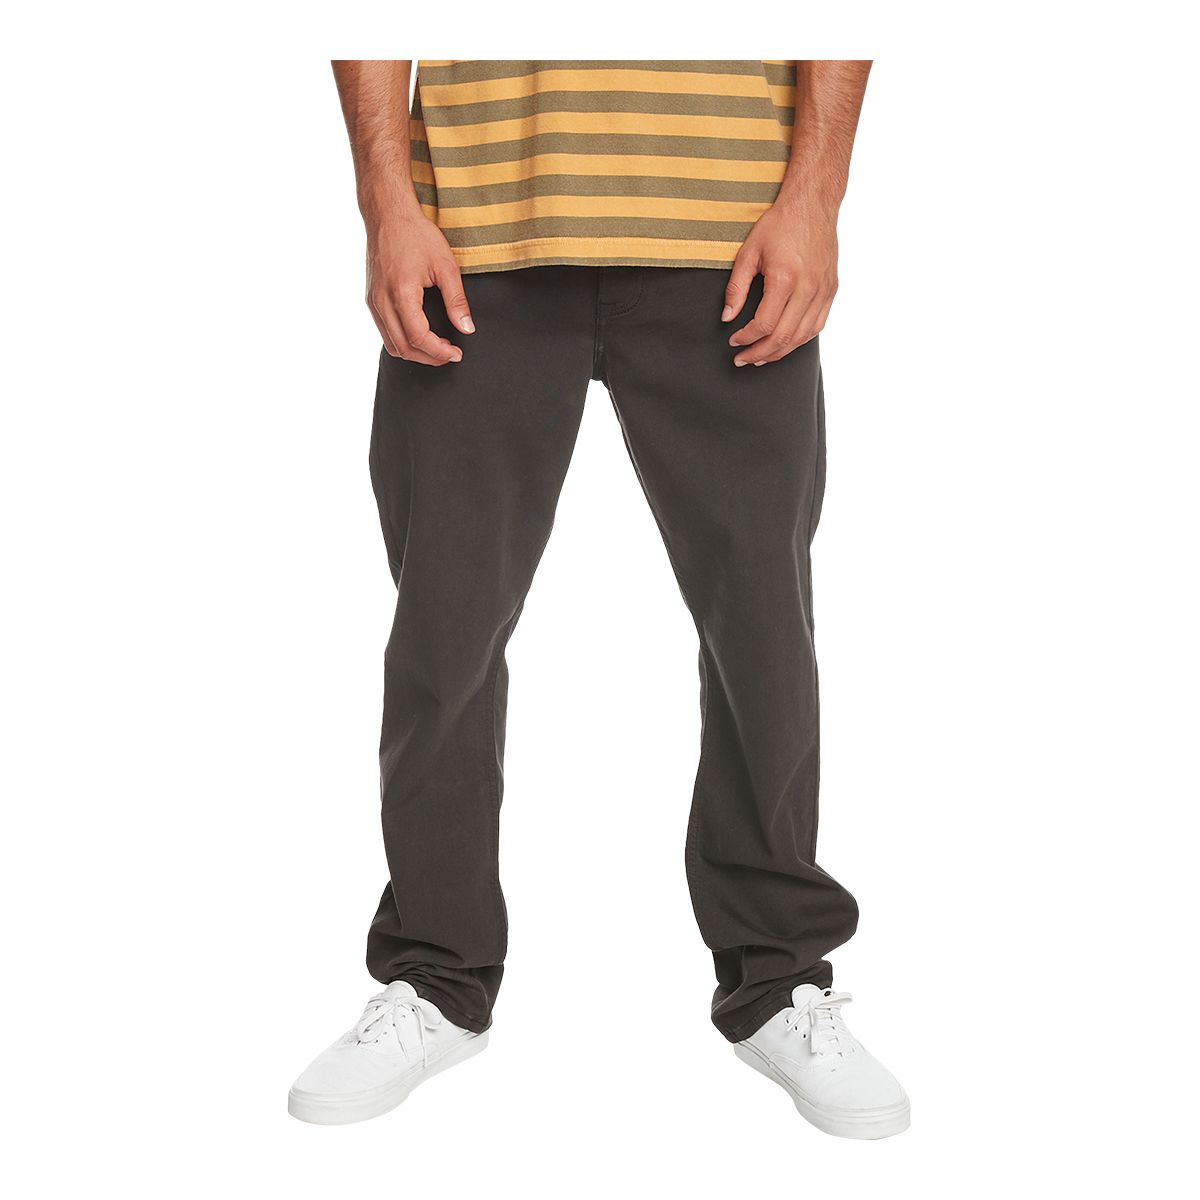 Carhartt Men's Relaxed Fit Canvas 5 Pocket Pants